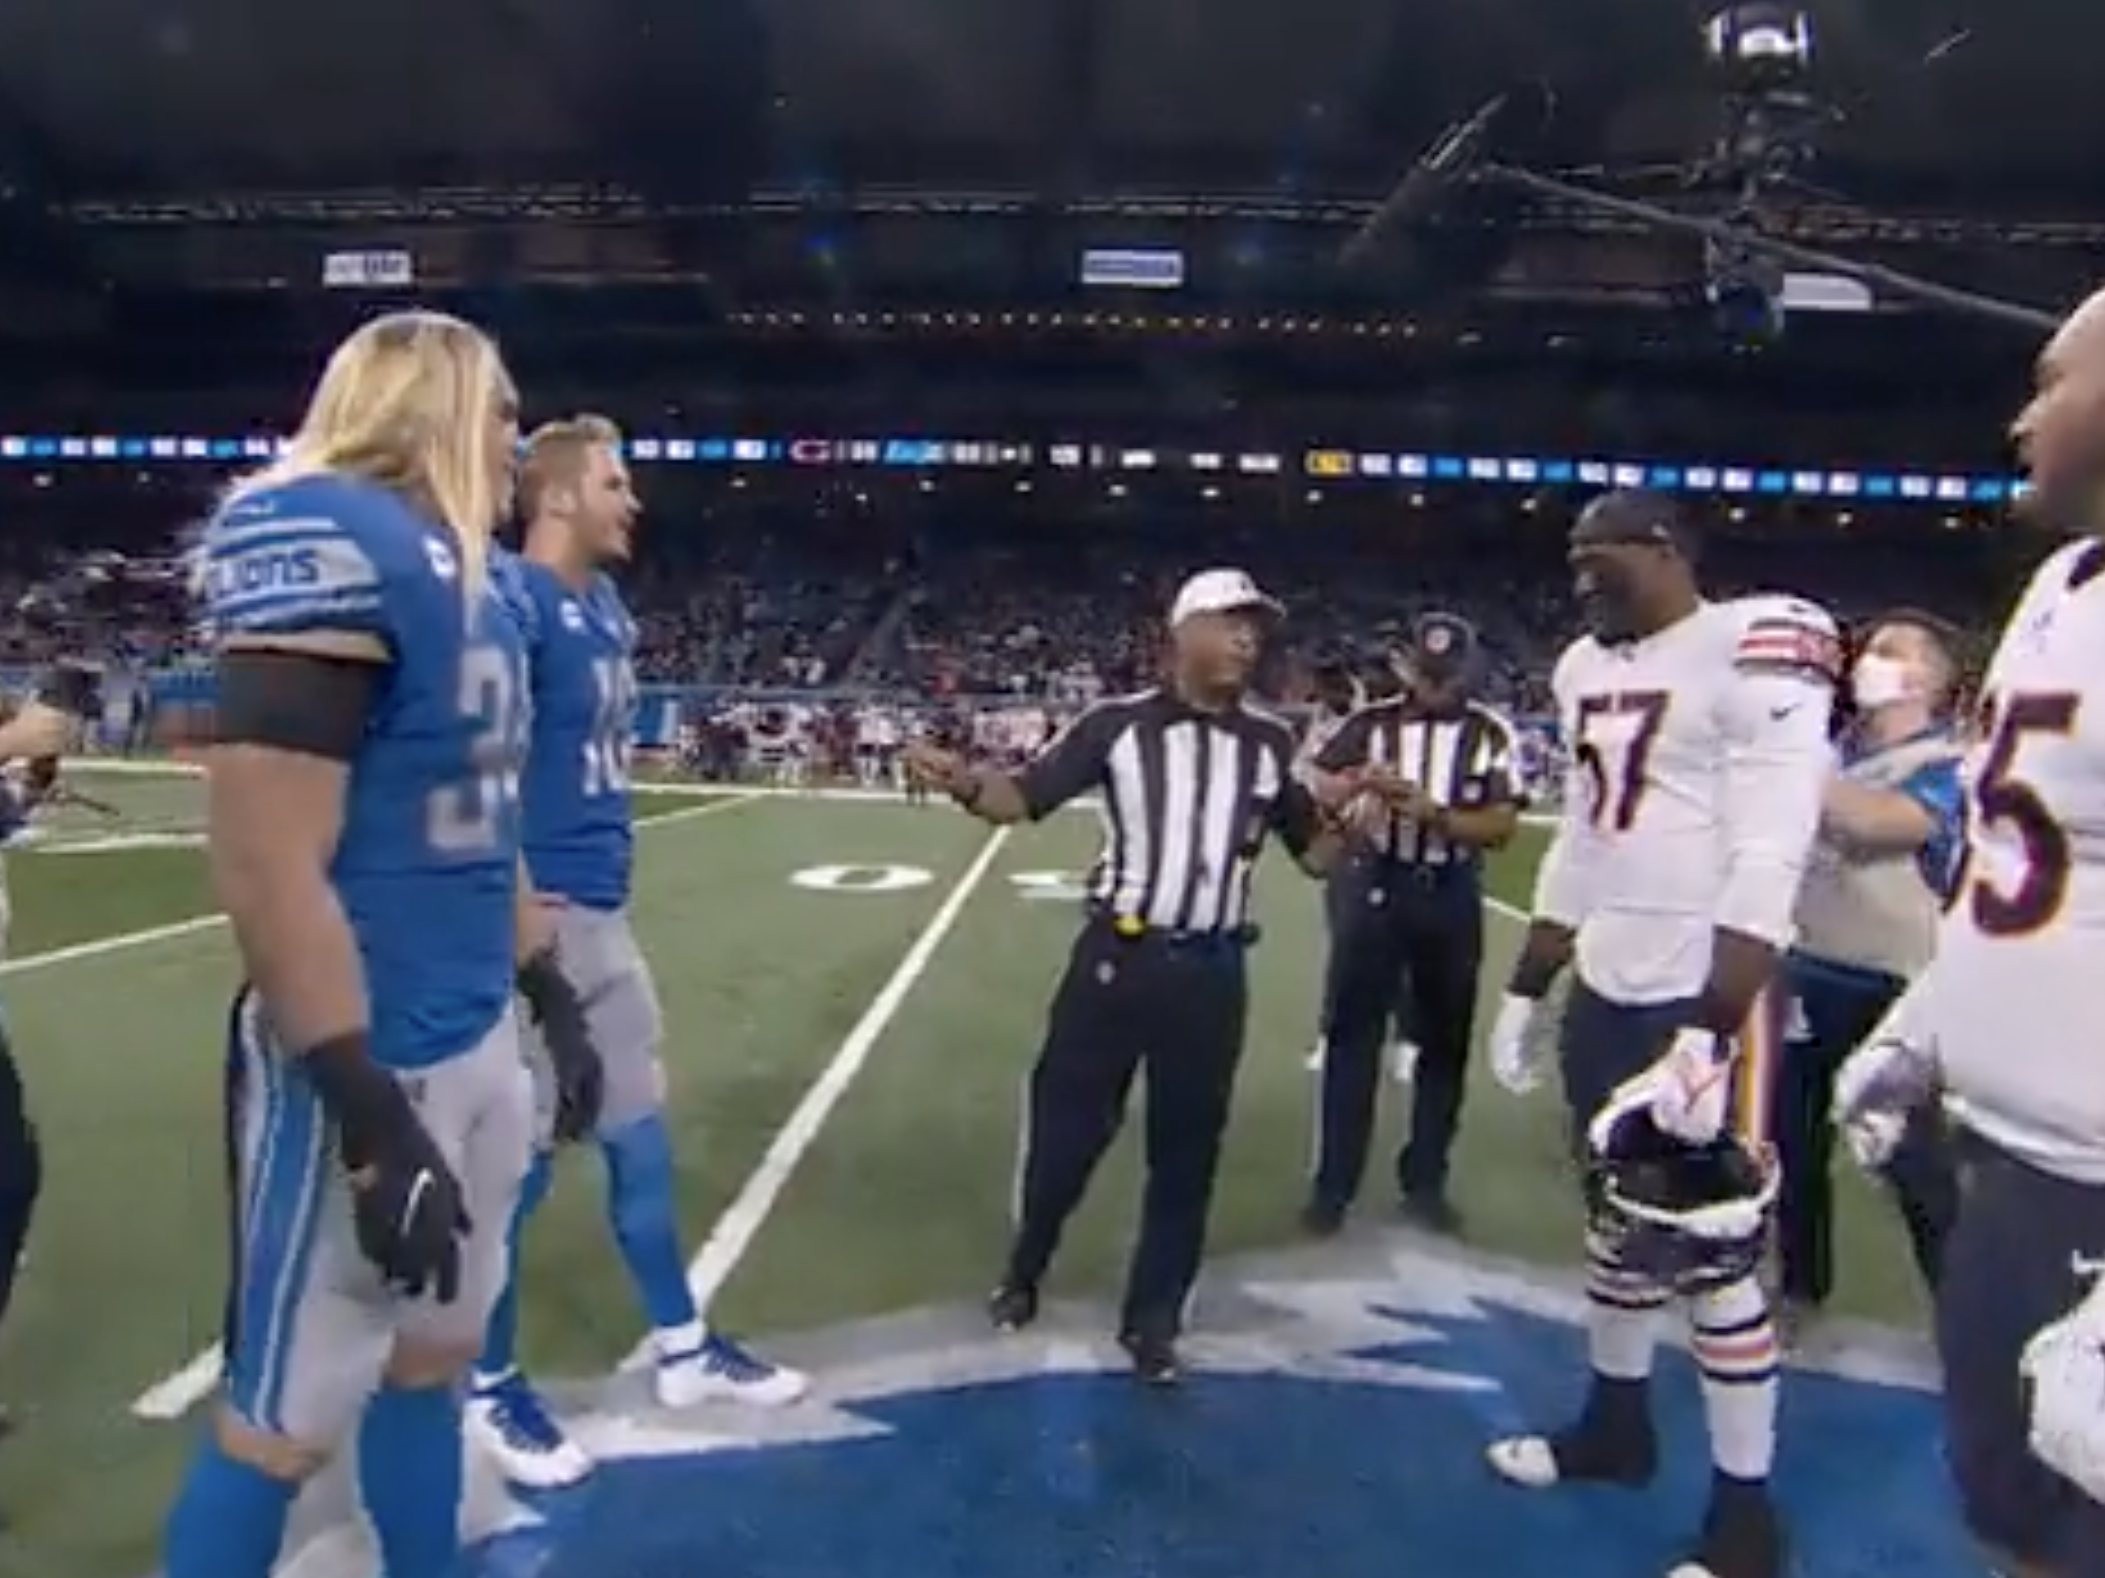 Lions and Bears players take part in coin toss ahead of Thanksgiving game.